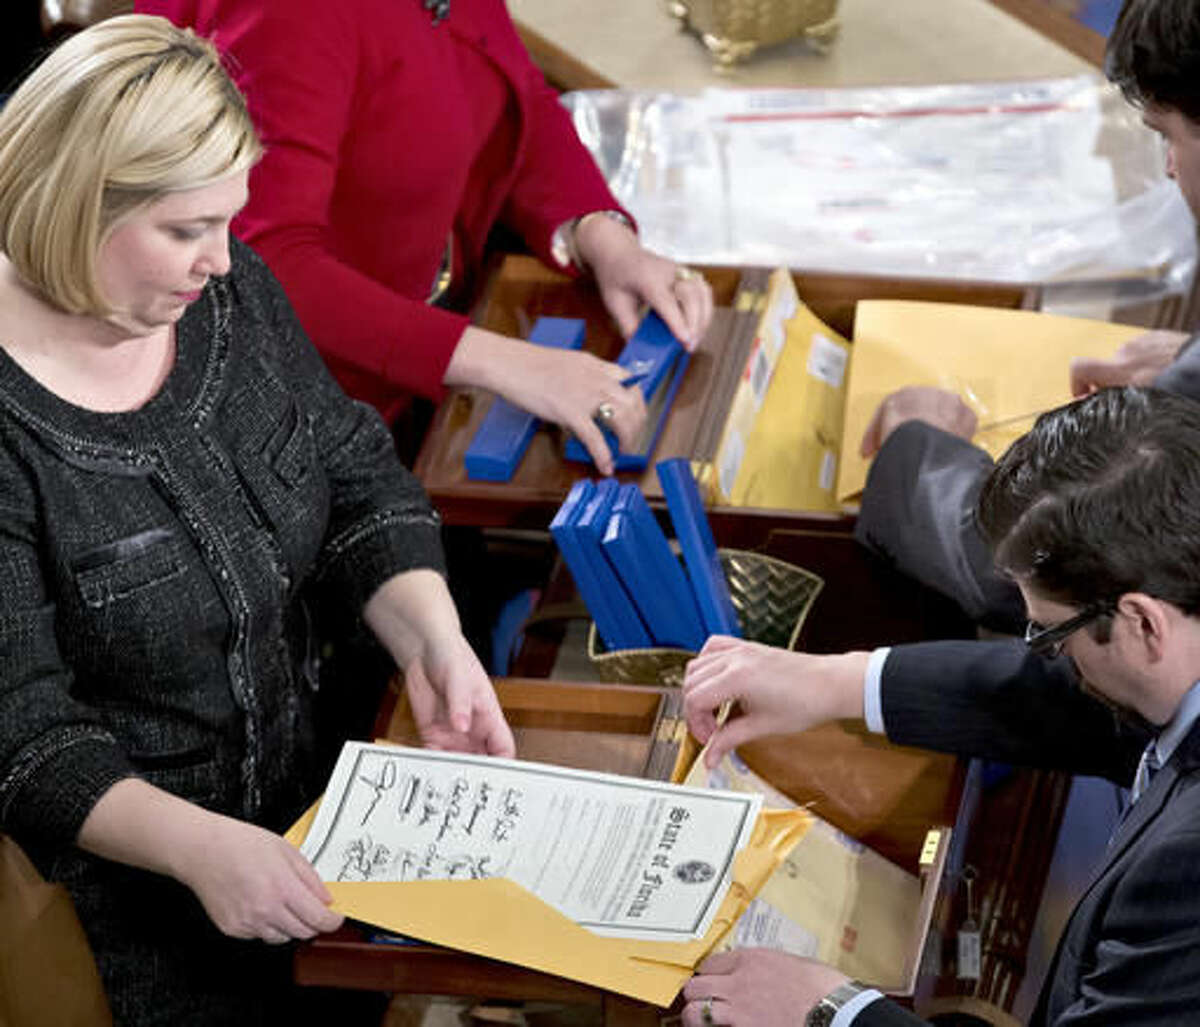 FILE - In this Jan. 4, 2013 file photo, clerks unseal the certificates of results from all fifty states during a meeting of the U.S. Electoral College in the House of Representatives on Capitol in Washington. The Electoral College was devised at the Constitutional Convention in 1787. It was a compromise meant to strike a balance between those who wanted popular elections for president and those who wanted no public input. (AP Photo/J. Scott Applewhite, File)